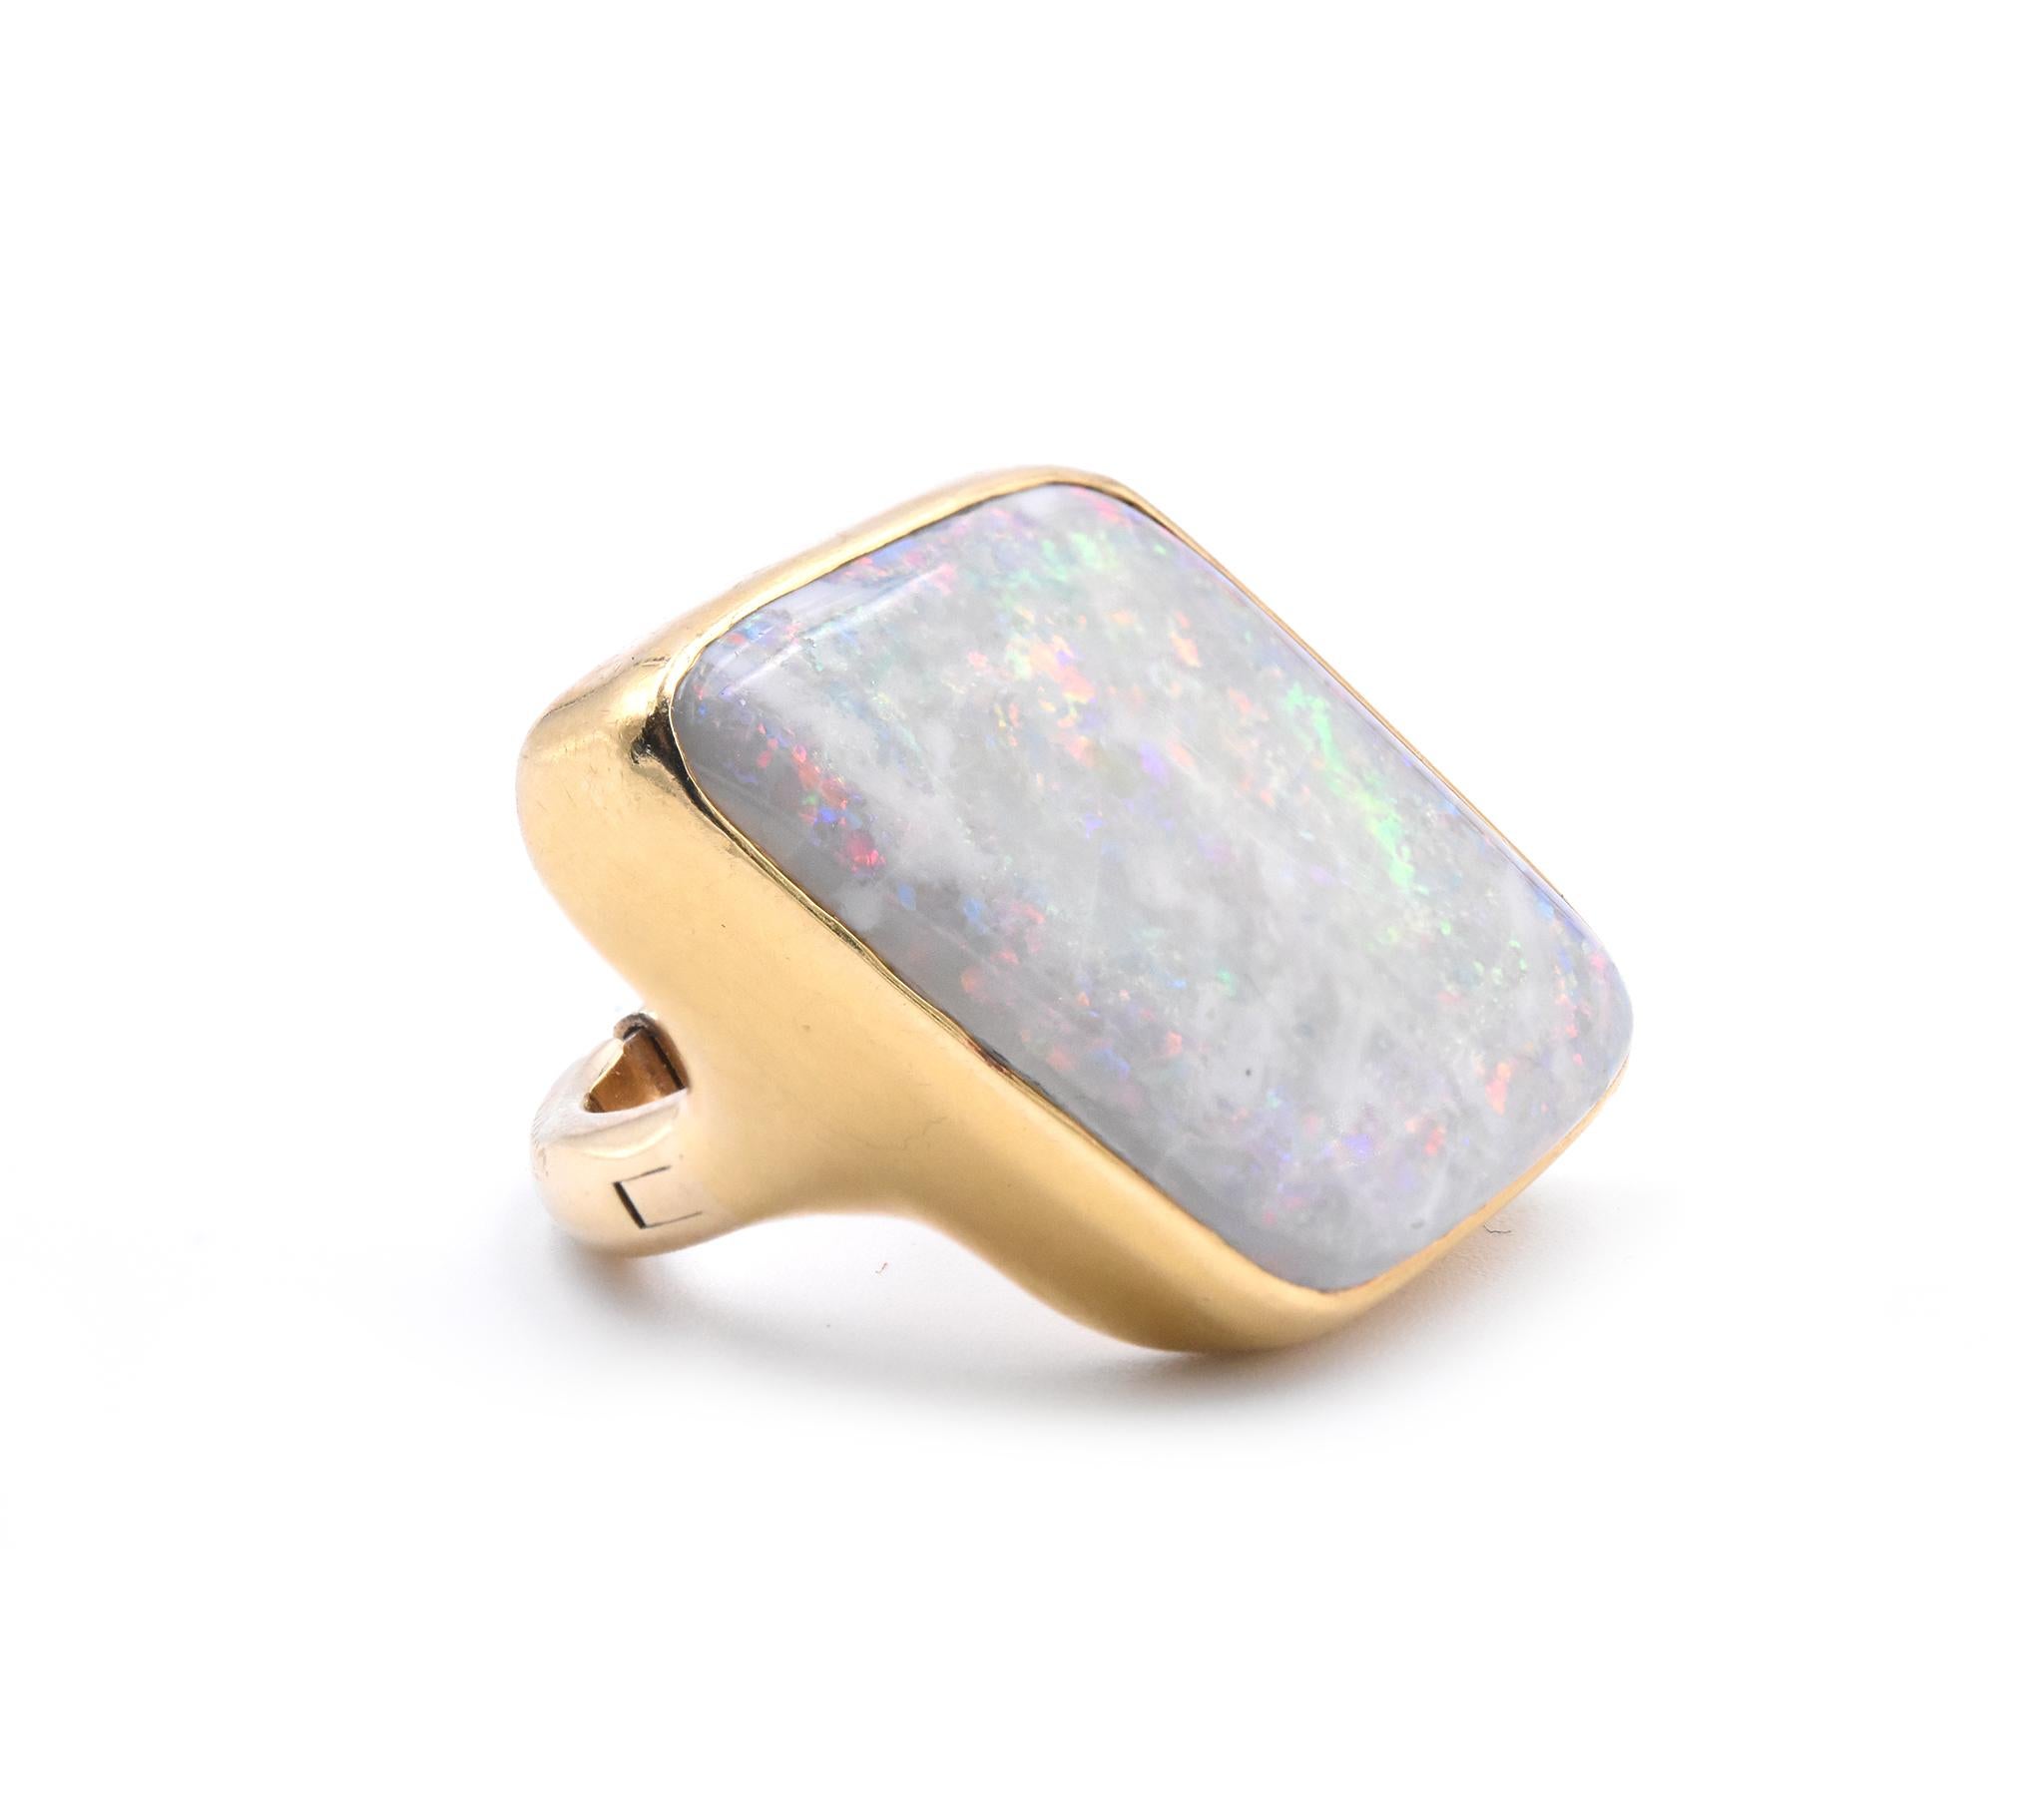 Material: 18k yellow gold
Gemstone: opal 
Ring Size: 4 ½ (please allow two additional shipping days for sizing requests)
Dimensions: ring top measures 33.70mm x 20.10mm
Weight: 23.79 grams
